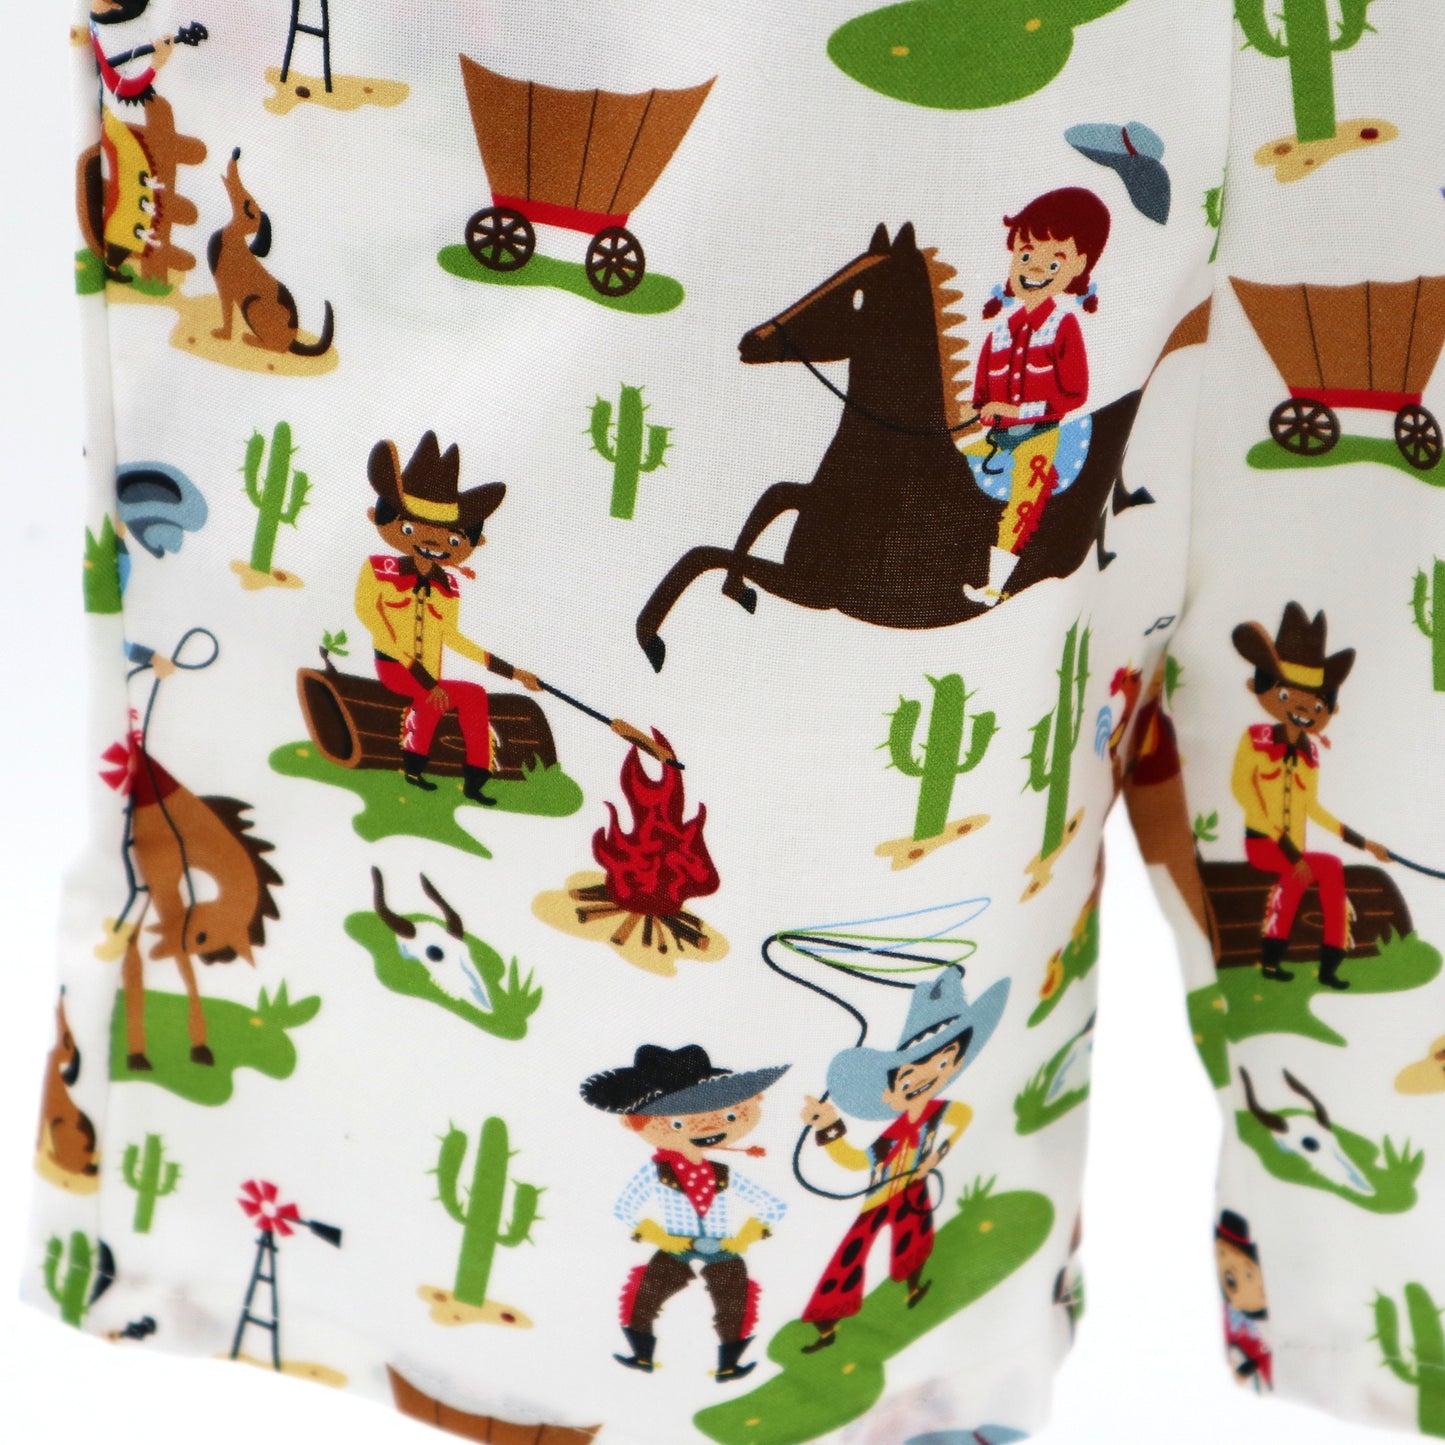 Kids shorts with pockets - sizes 000 to 6 - retro cowboy